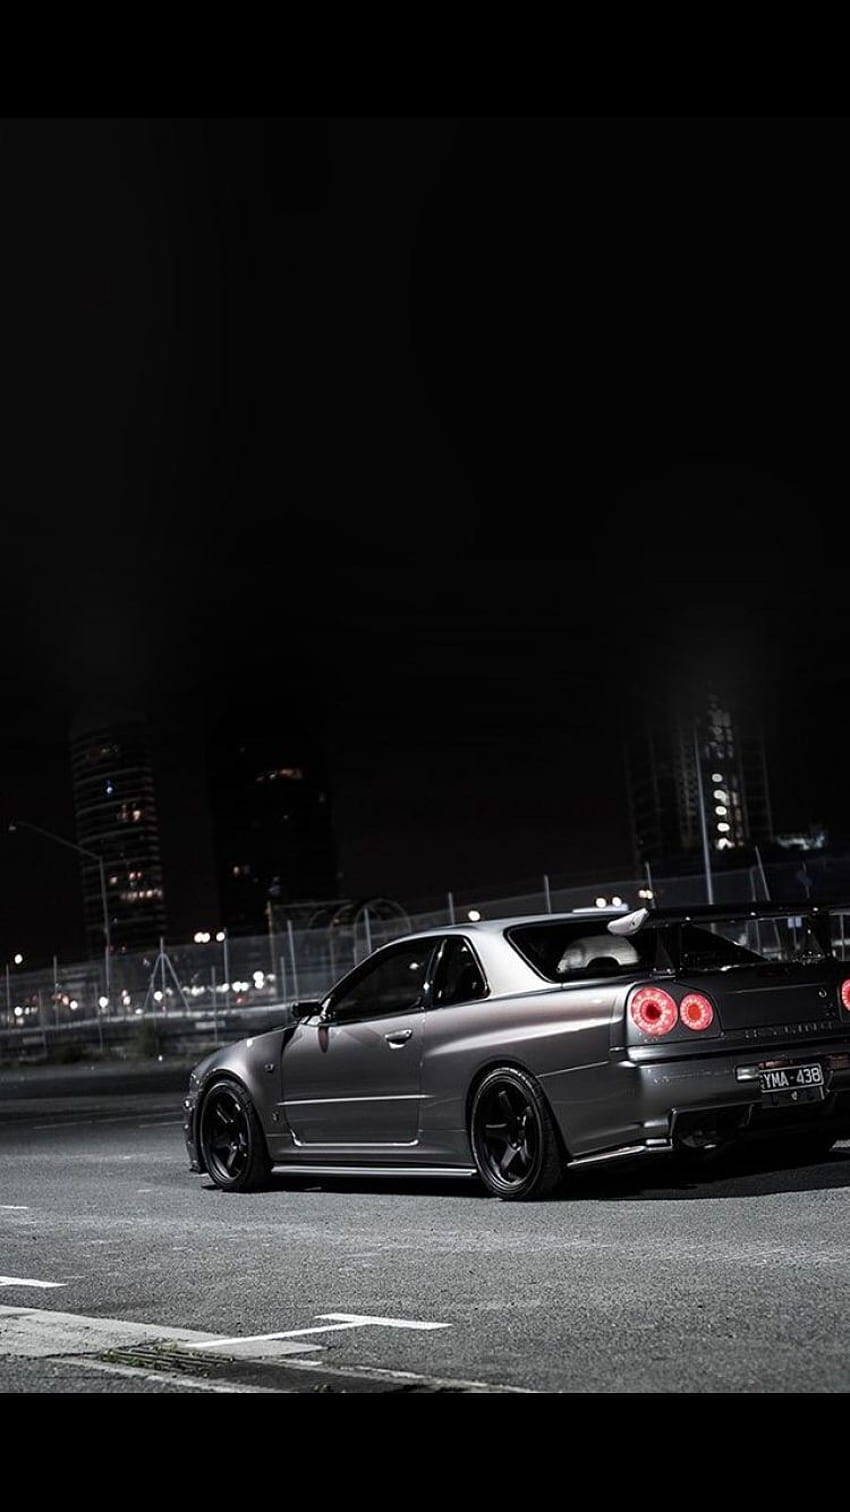 Car wallpaper HD for iphone and android iphone wallpaper  Nissan silvia Jdm  wallpaper Jdm cars